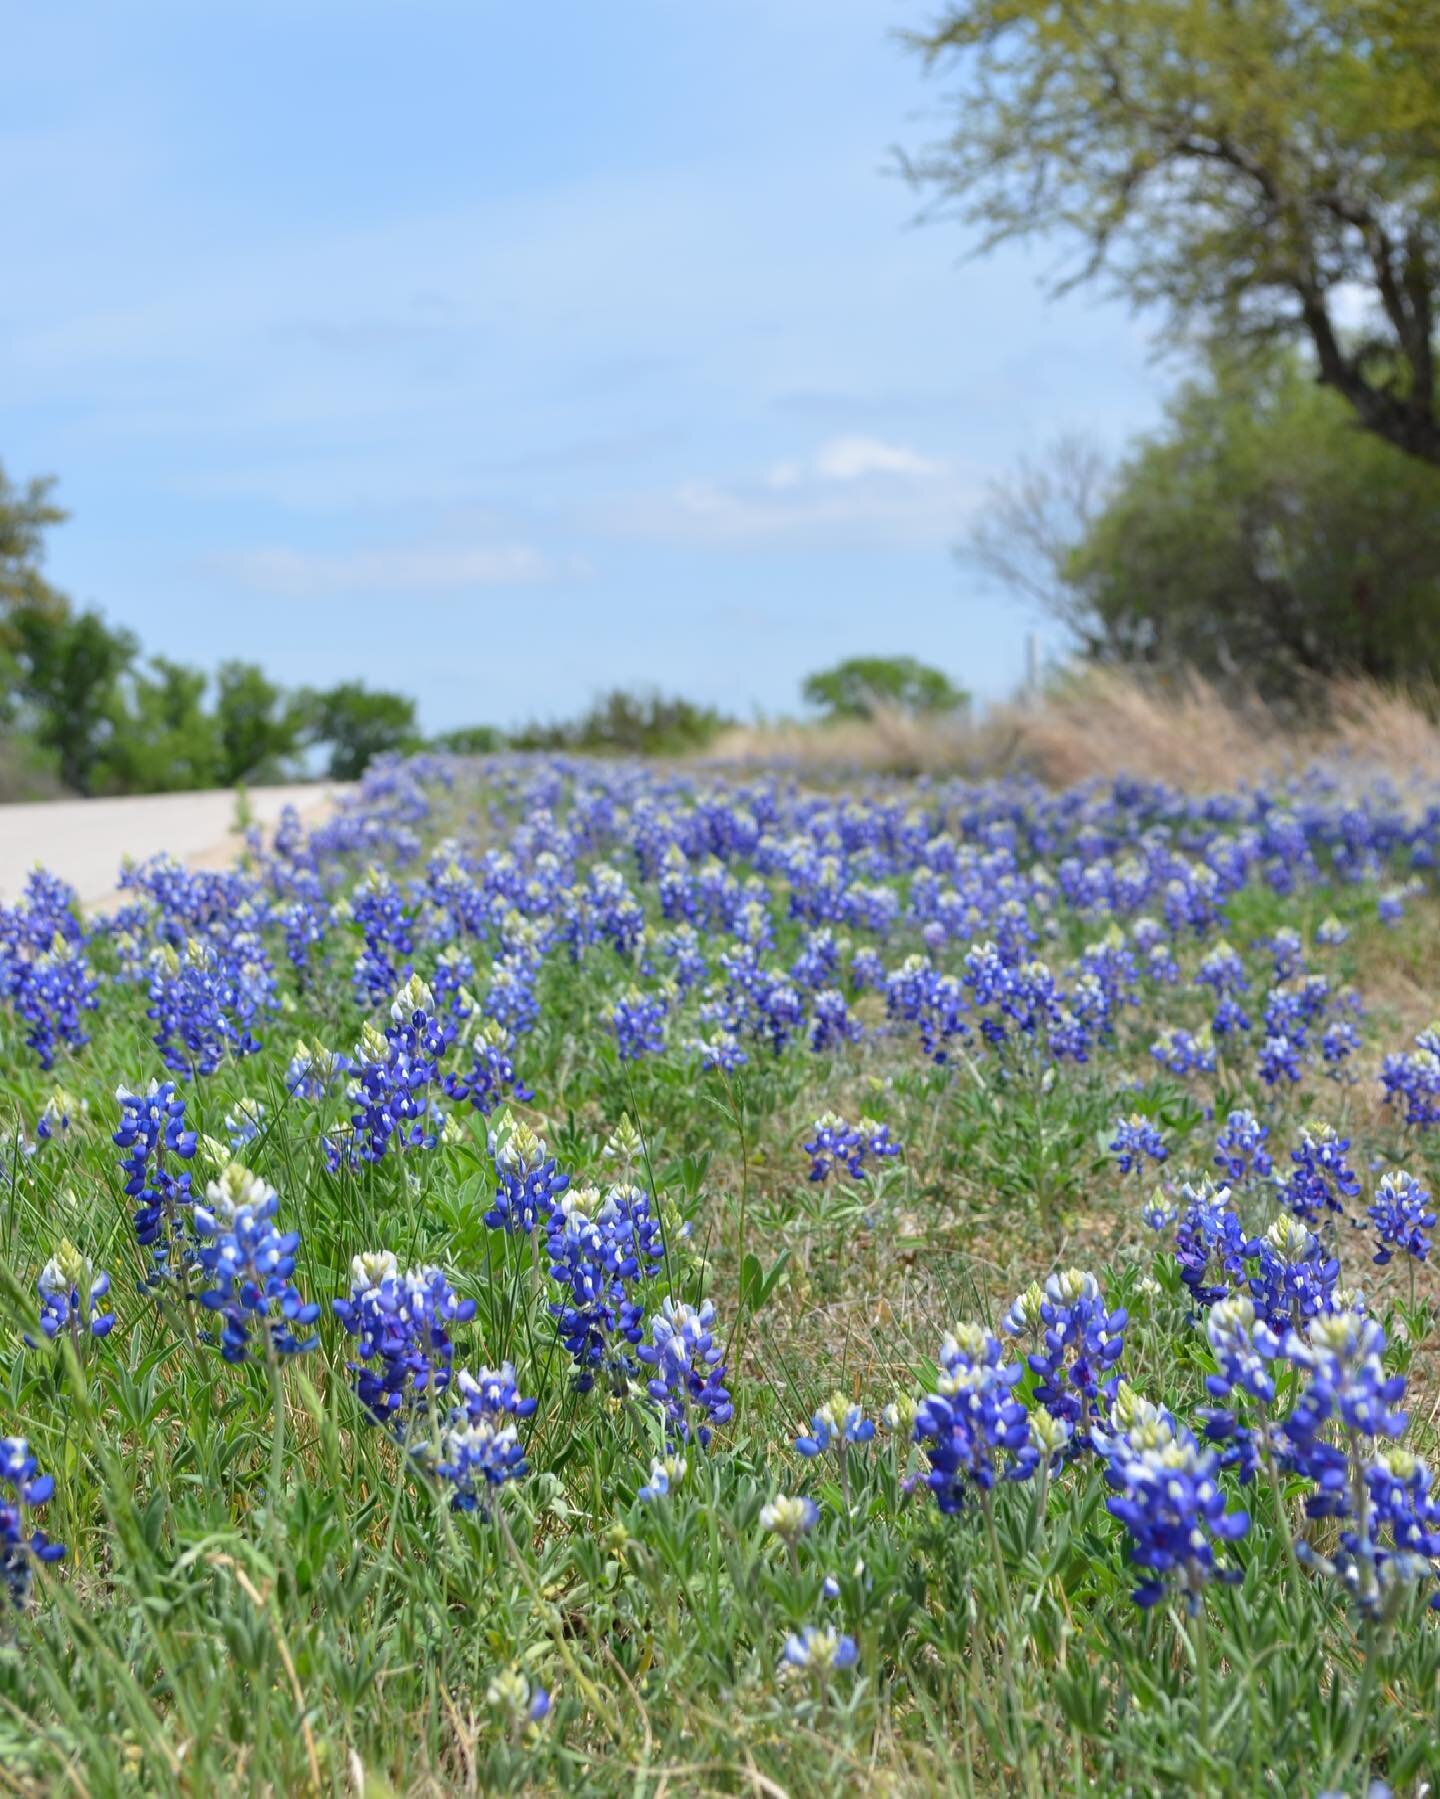 It&rsquo;s that time of year! 💙 Enjoy several miles of groomed trails that wind through the glorious Texas Hill Country. Whether you're a runner, casual hiker, or love to ride on horseback, our trails offer a convenient and peaceful outdoor haven. A